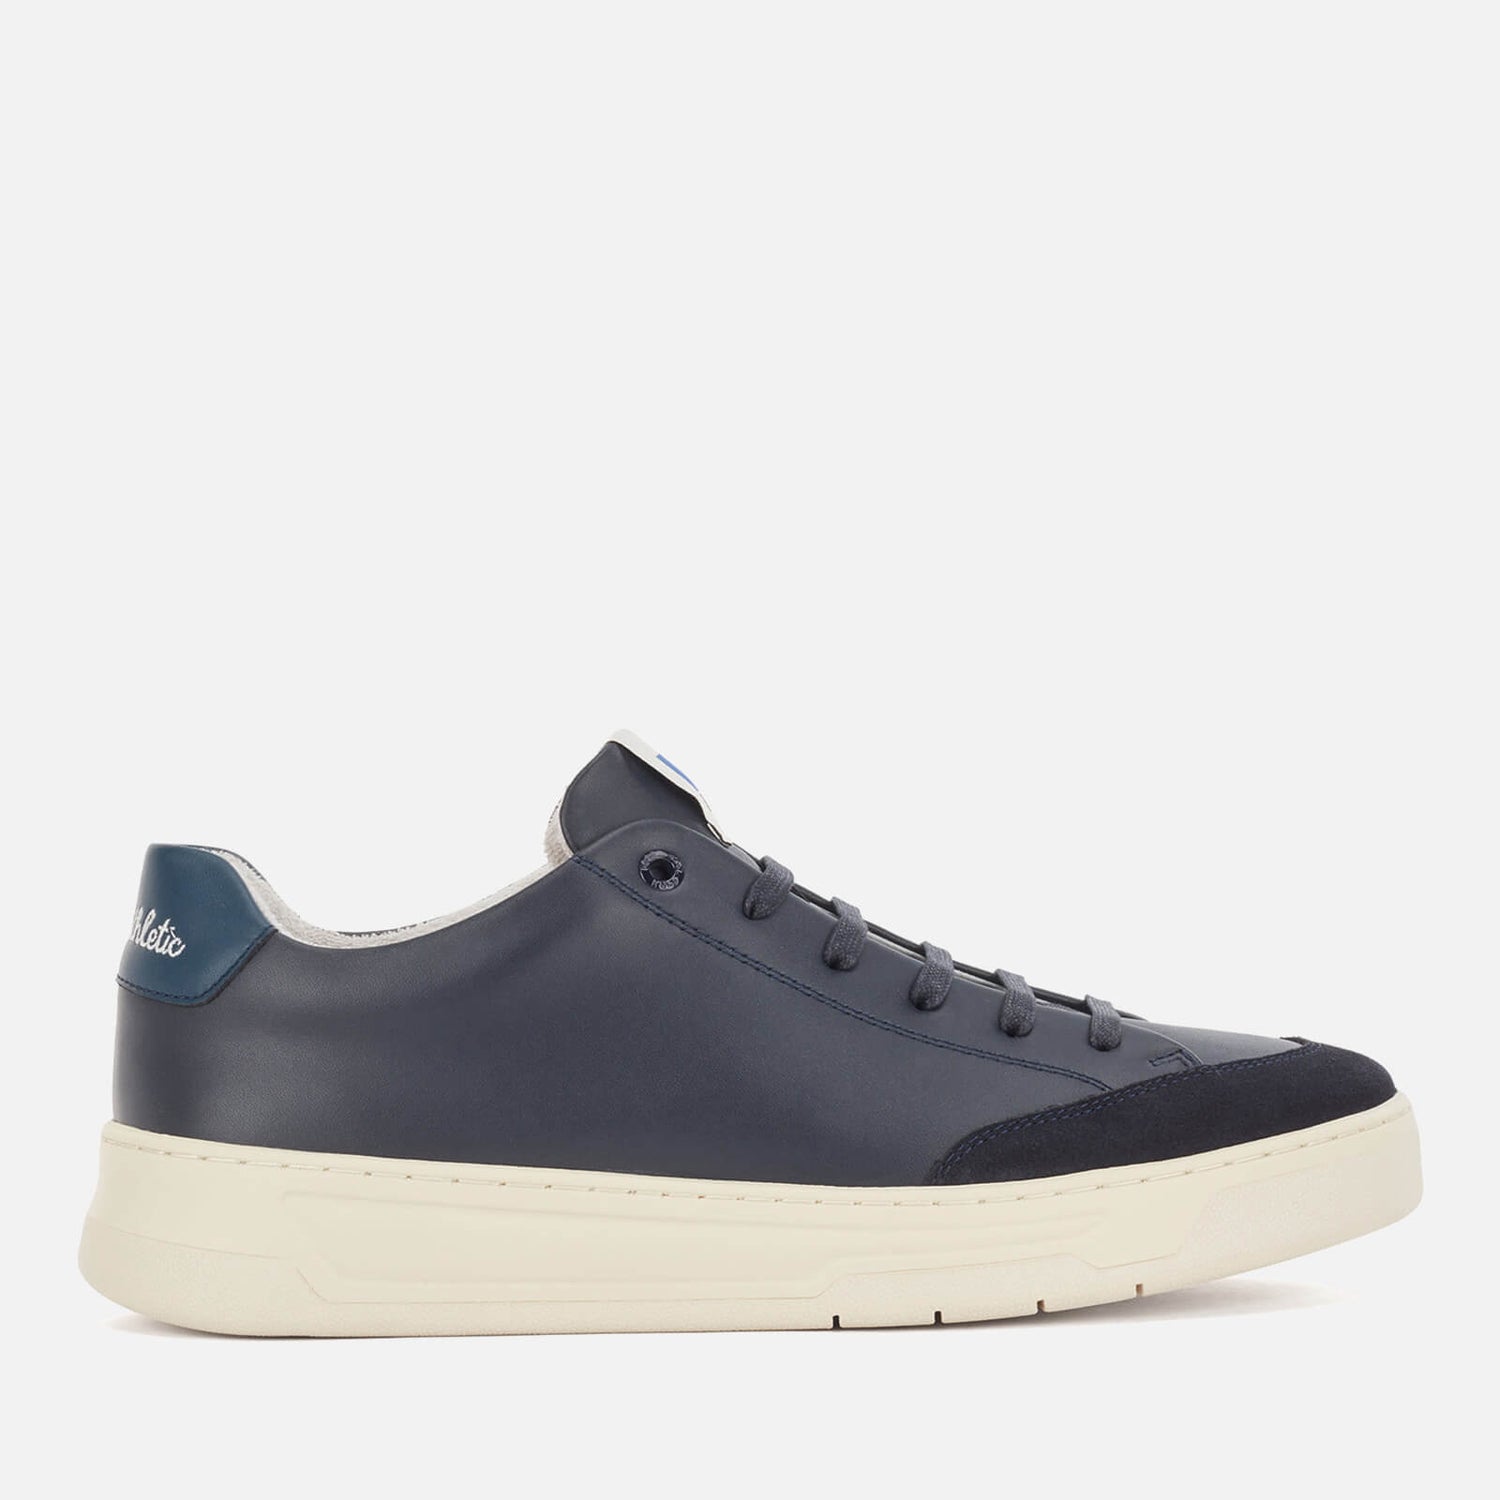 BOSS X Russell Athletic Men's Baltimore Tennis 01 Trainers - Navy - UK 8